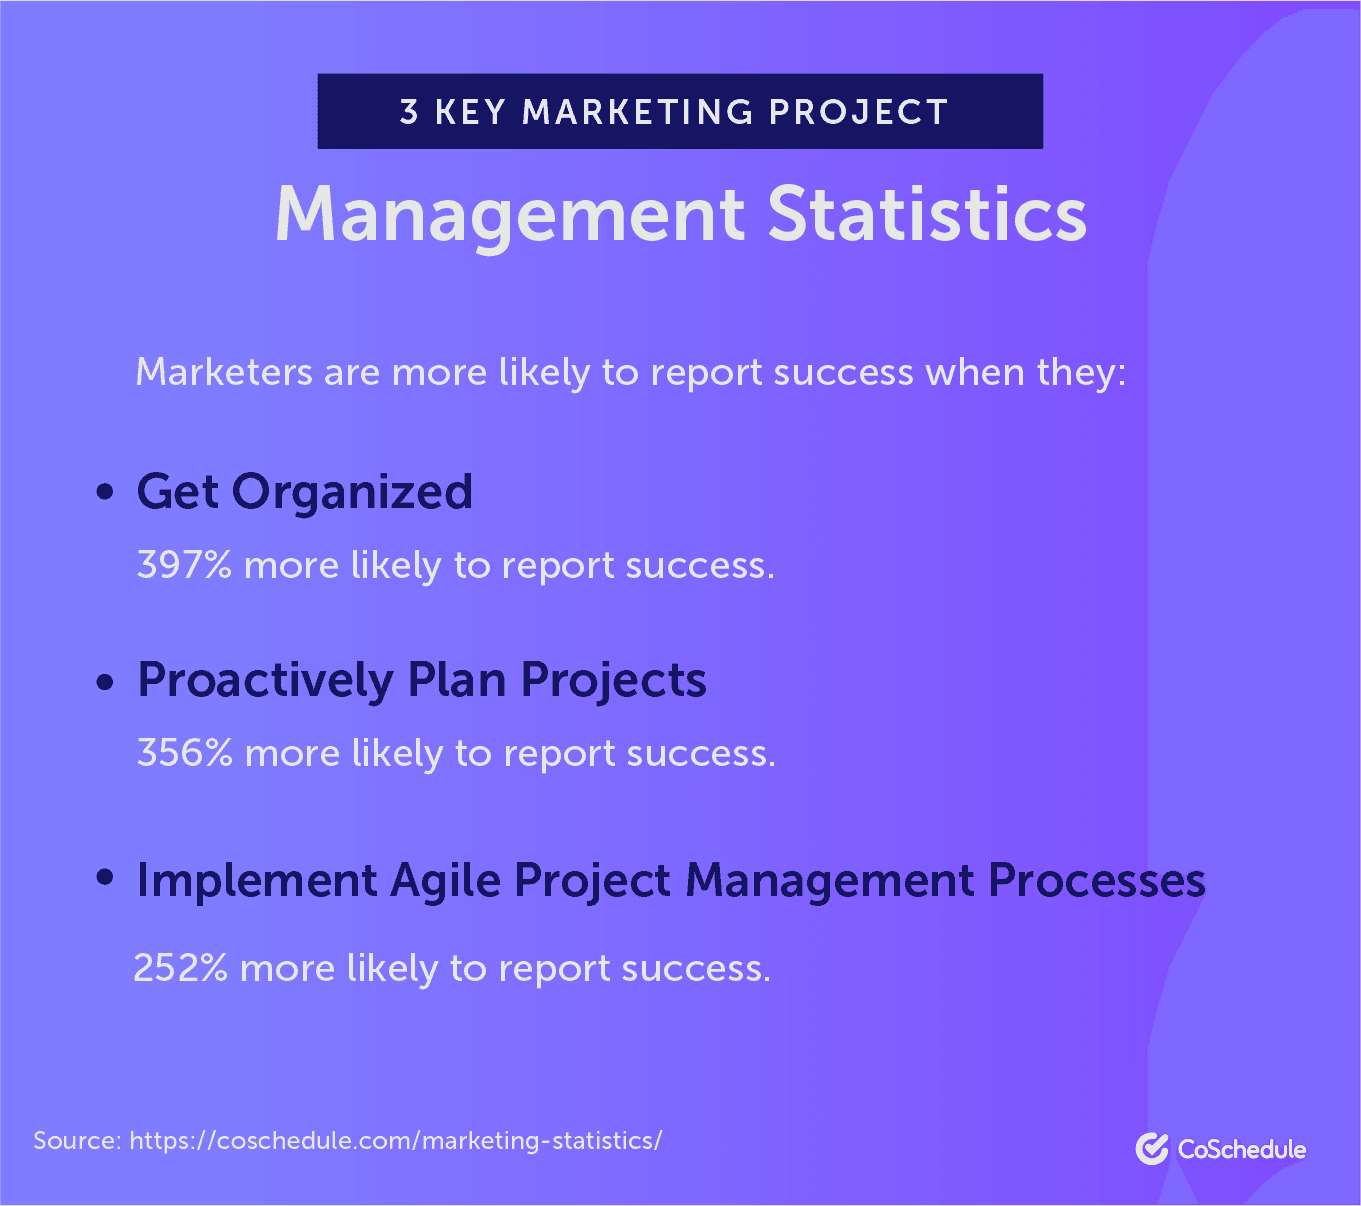 Marketing Project Management Software: How to Choose the Best Option